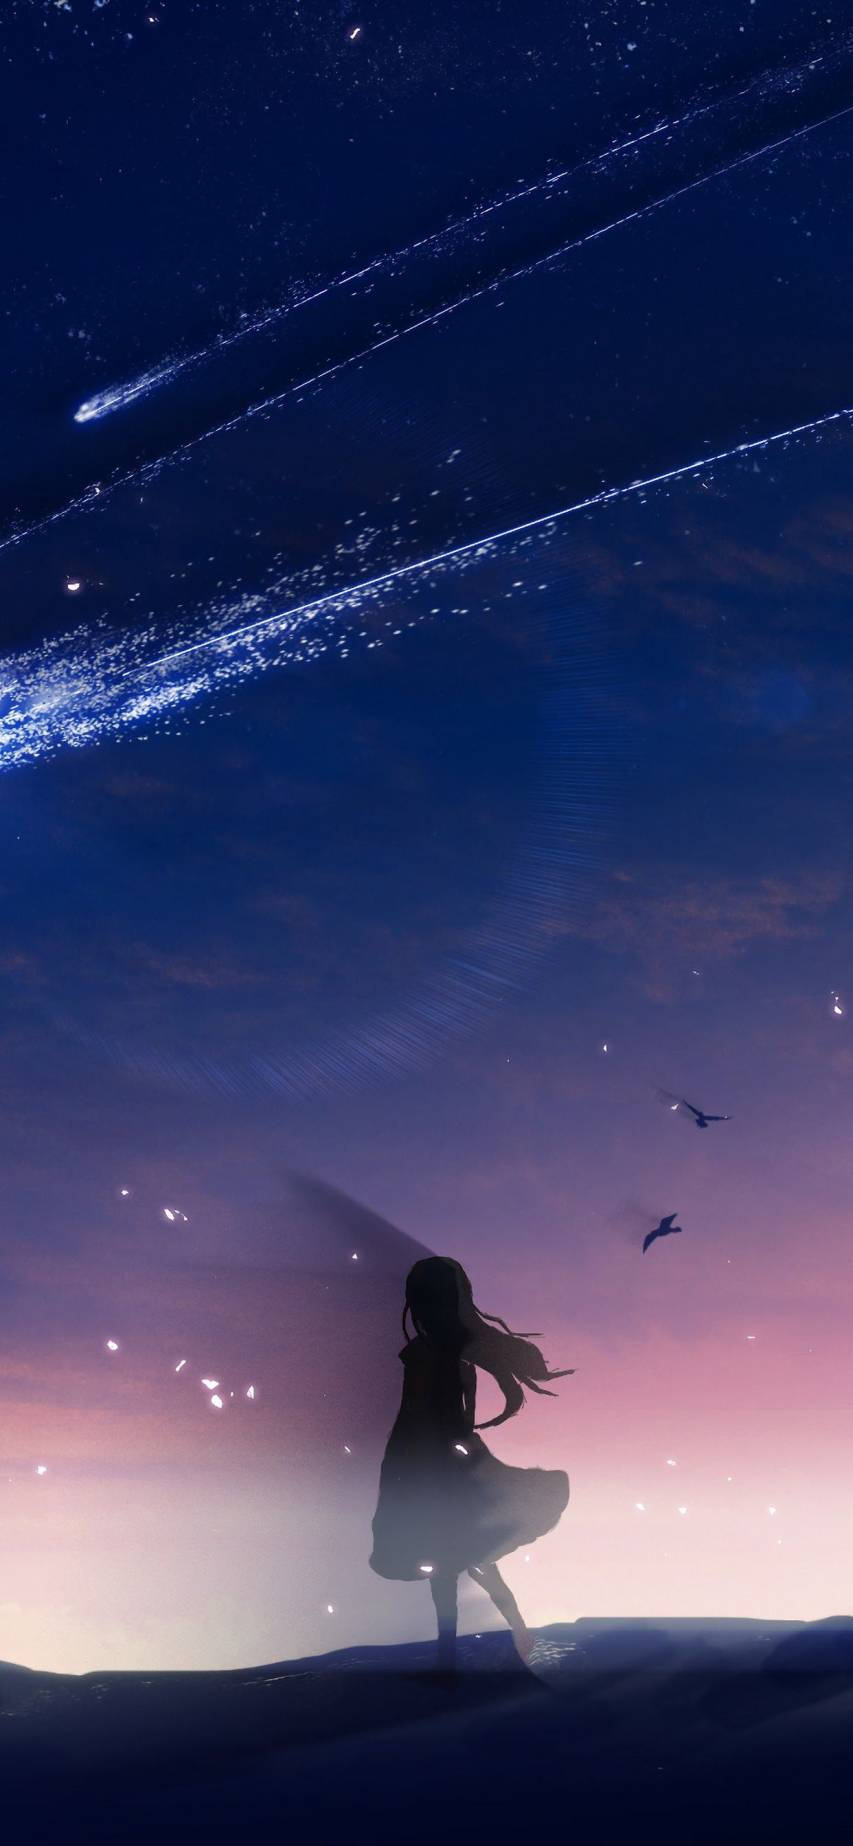 1080x1920 Resolution Anime Girl HD Landscape Cool Art Iphone 7, 6s, 6 Plus  and Pixel XL ,One Plus 3, 3t, 5 Wallpaper - Wallpapers Den